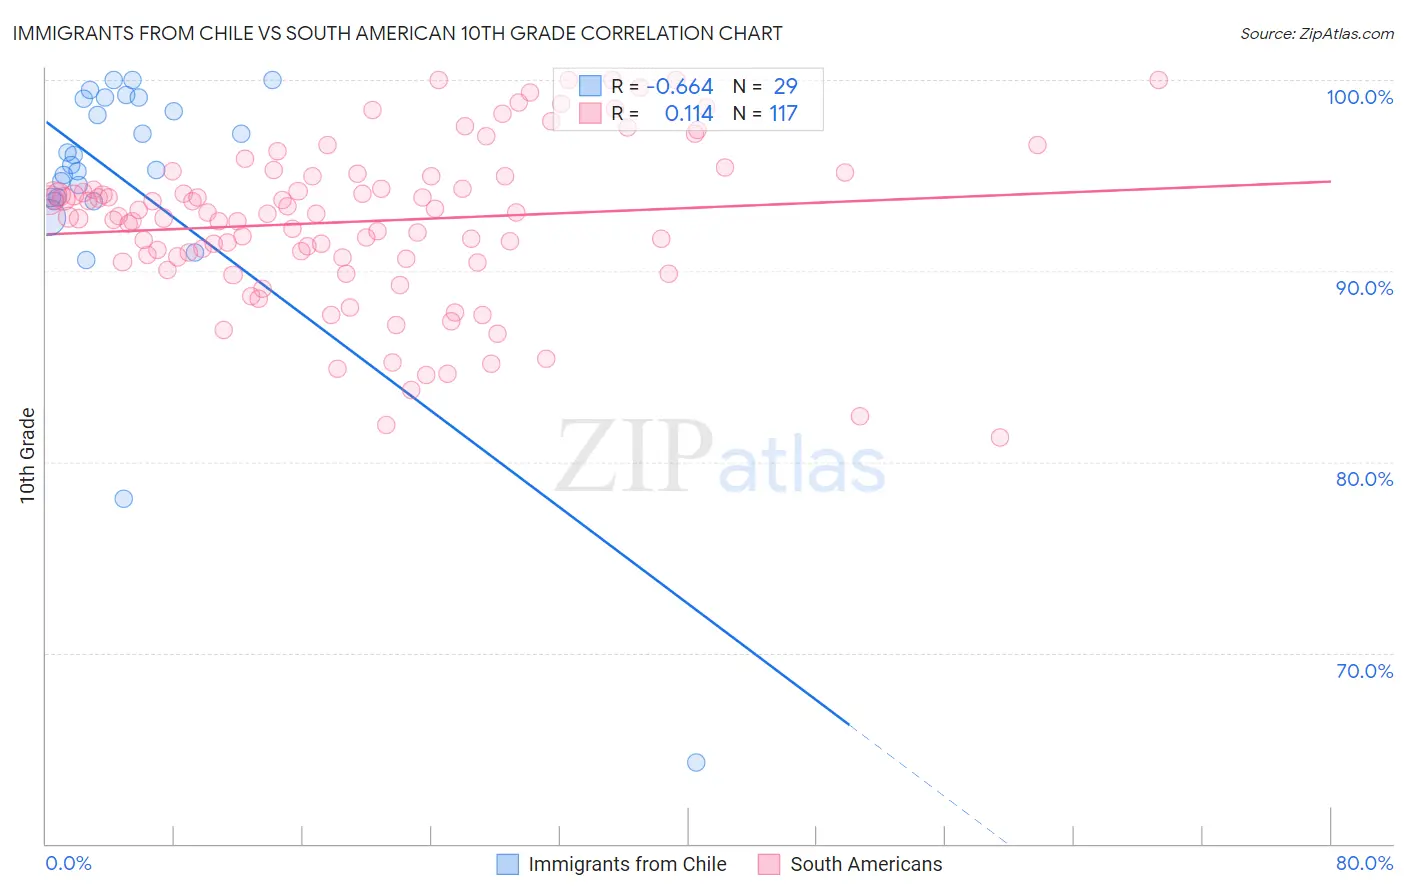 Immigrants from Chile vs South American 10th Grade